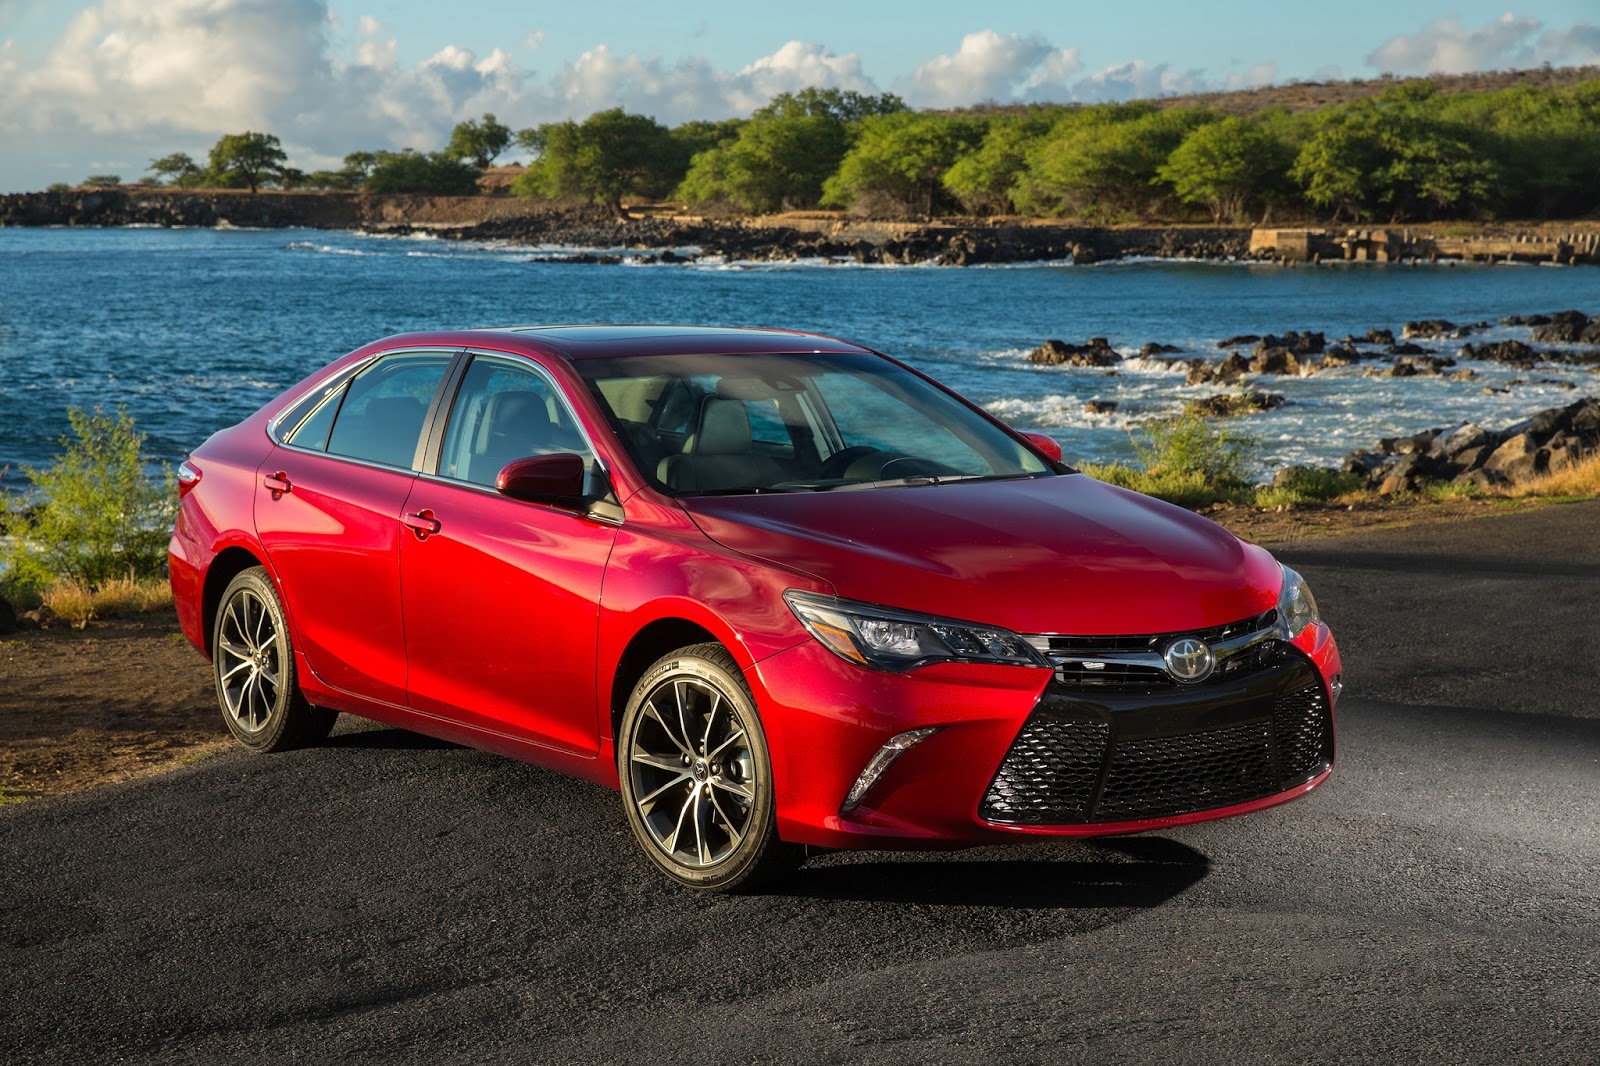 The Sporting Camry The 2016 Toyota Camry XSE